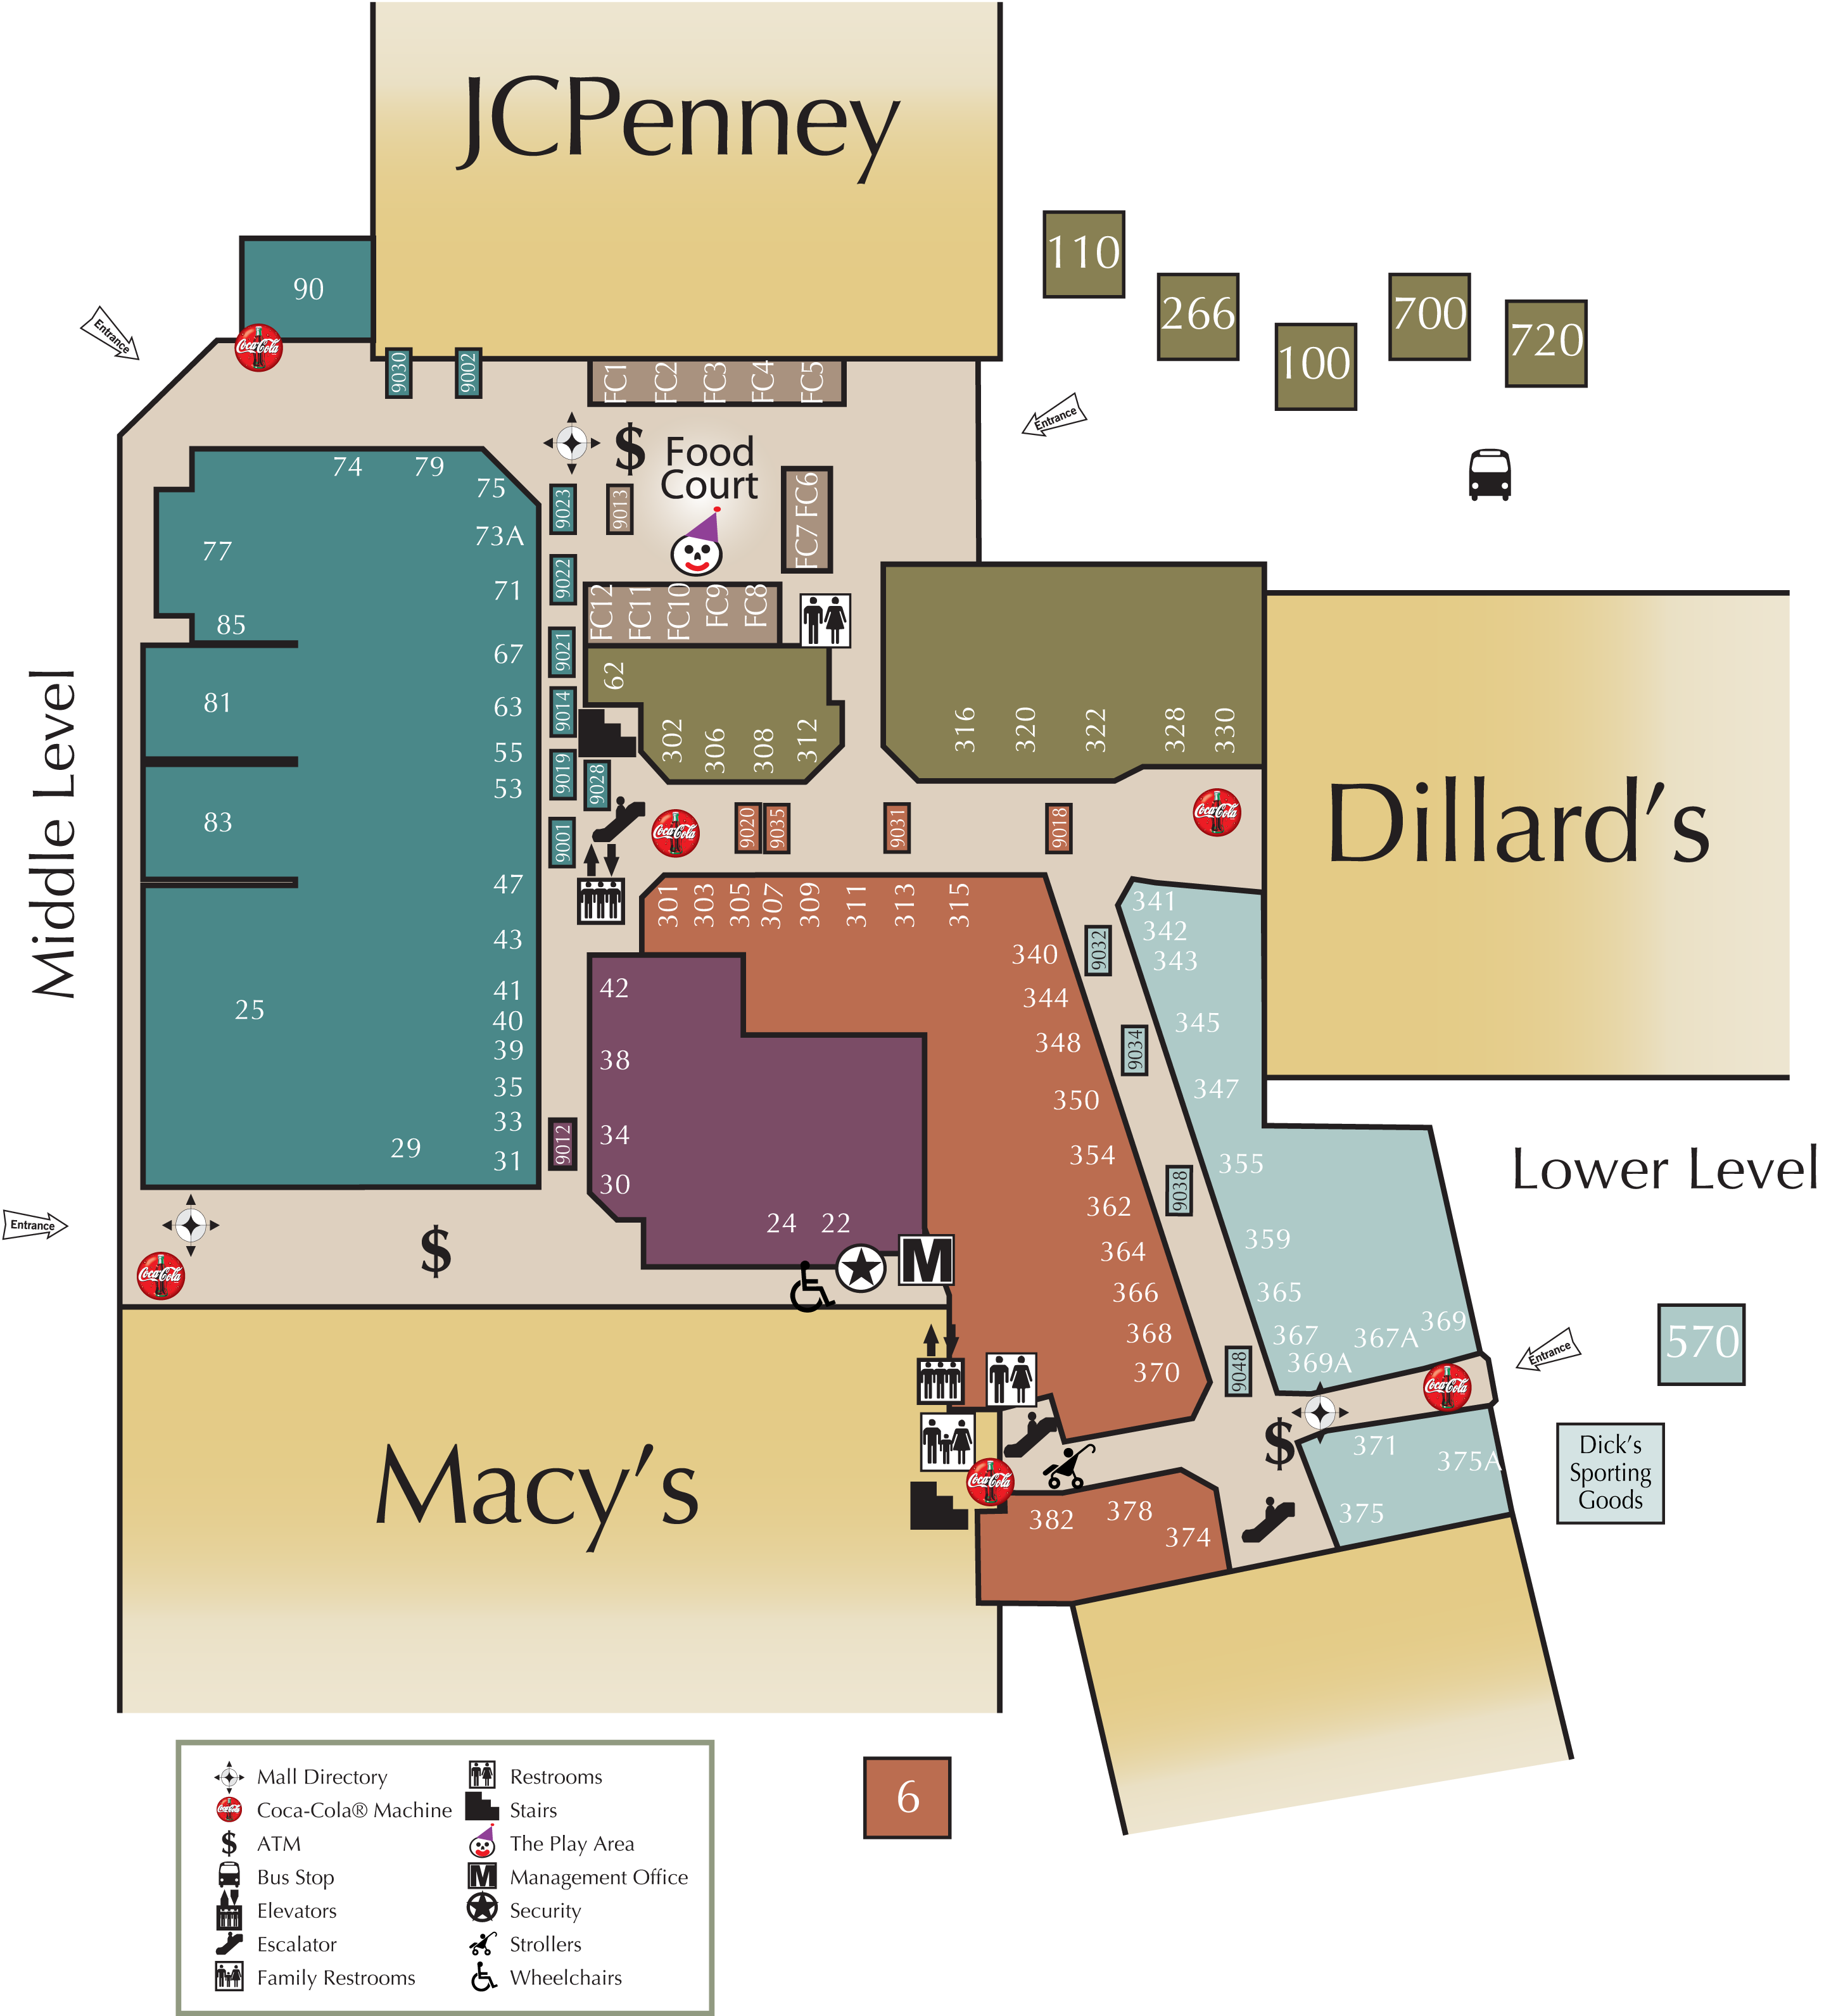 Mall Directory | South County Center